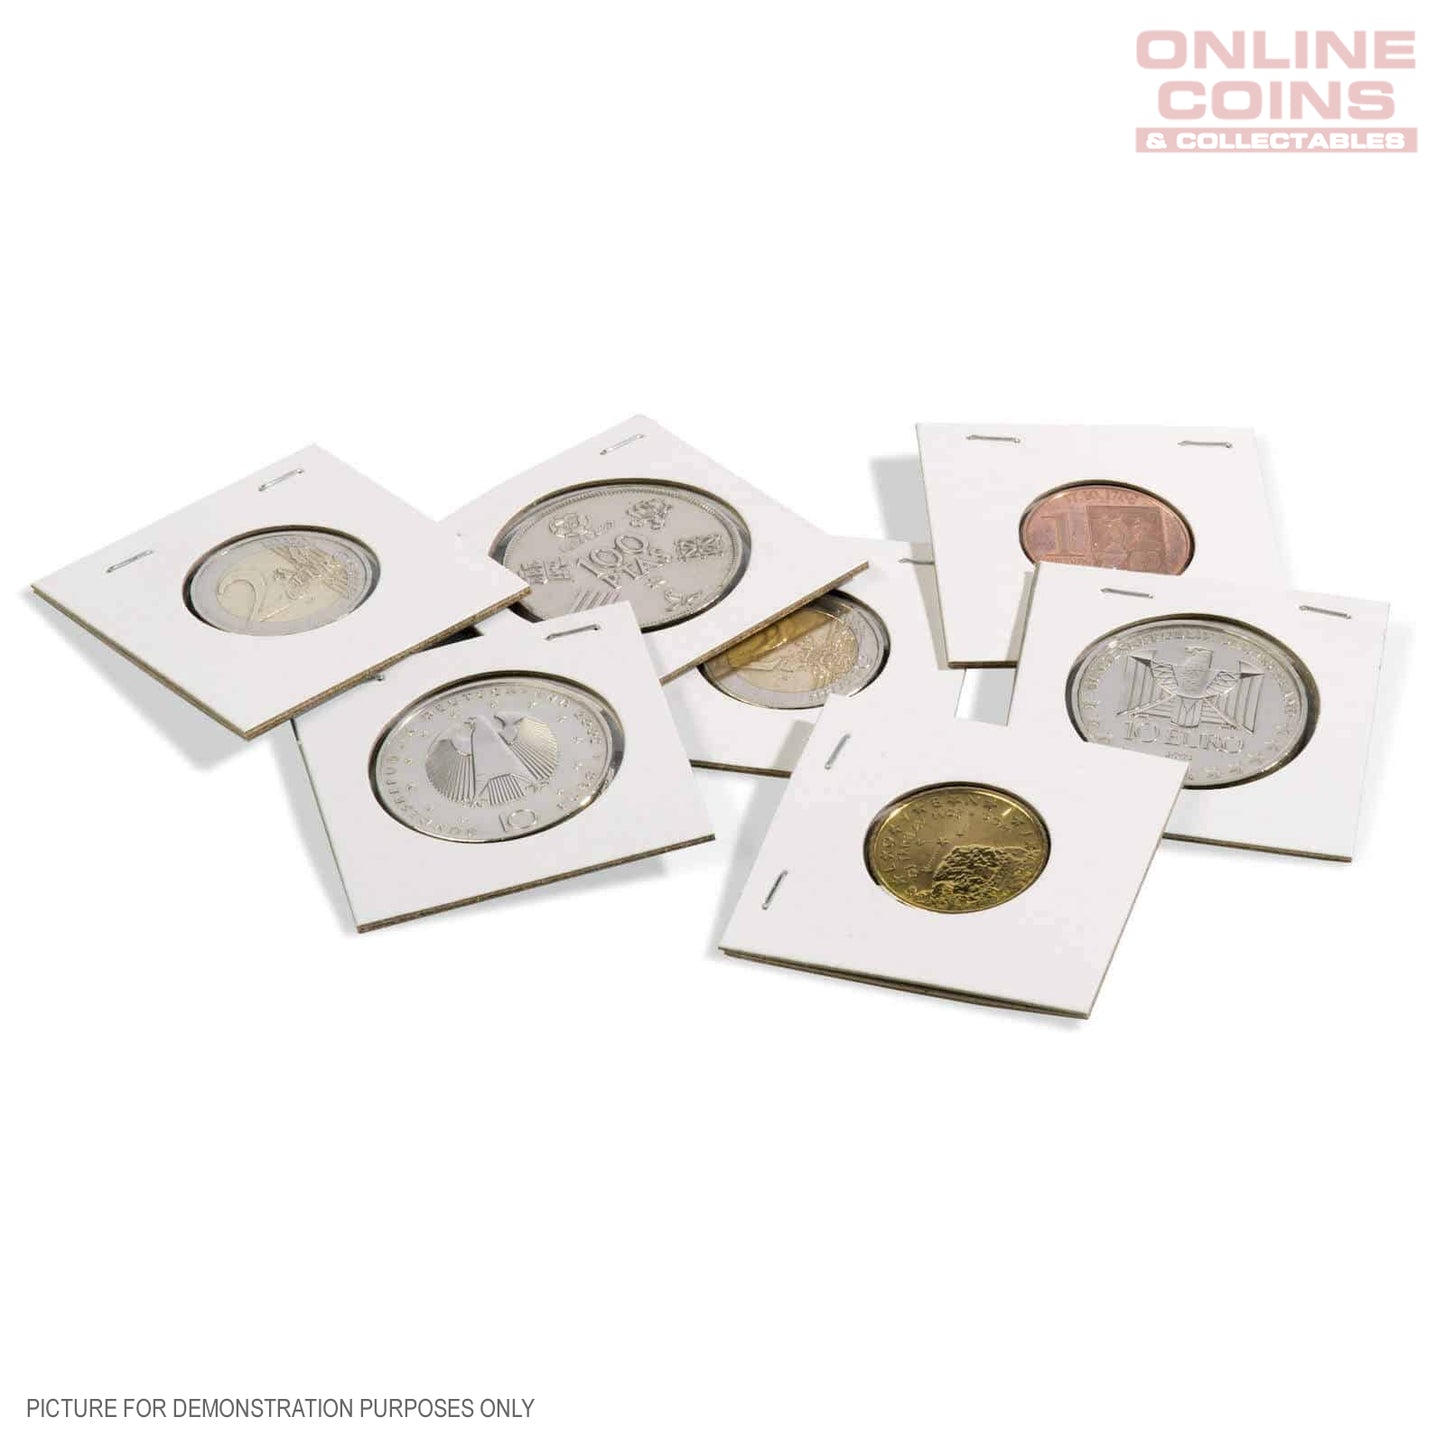 Lighthouse TACK 17.5mm Staple 2"x 2" Coin Holders x 25 - Protection For Your Coins (Suitable For Australian Threepence Coins)